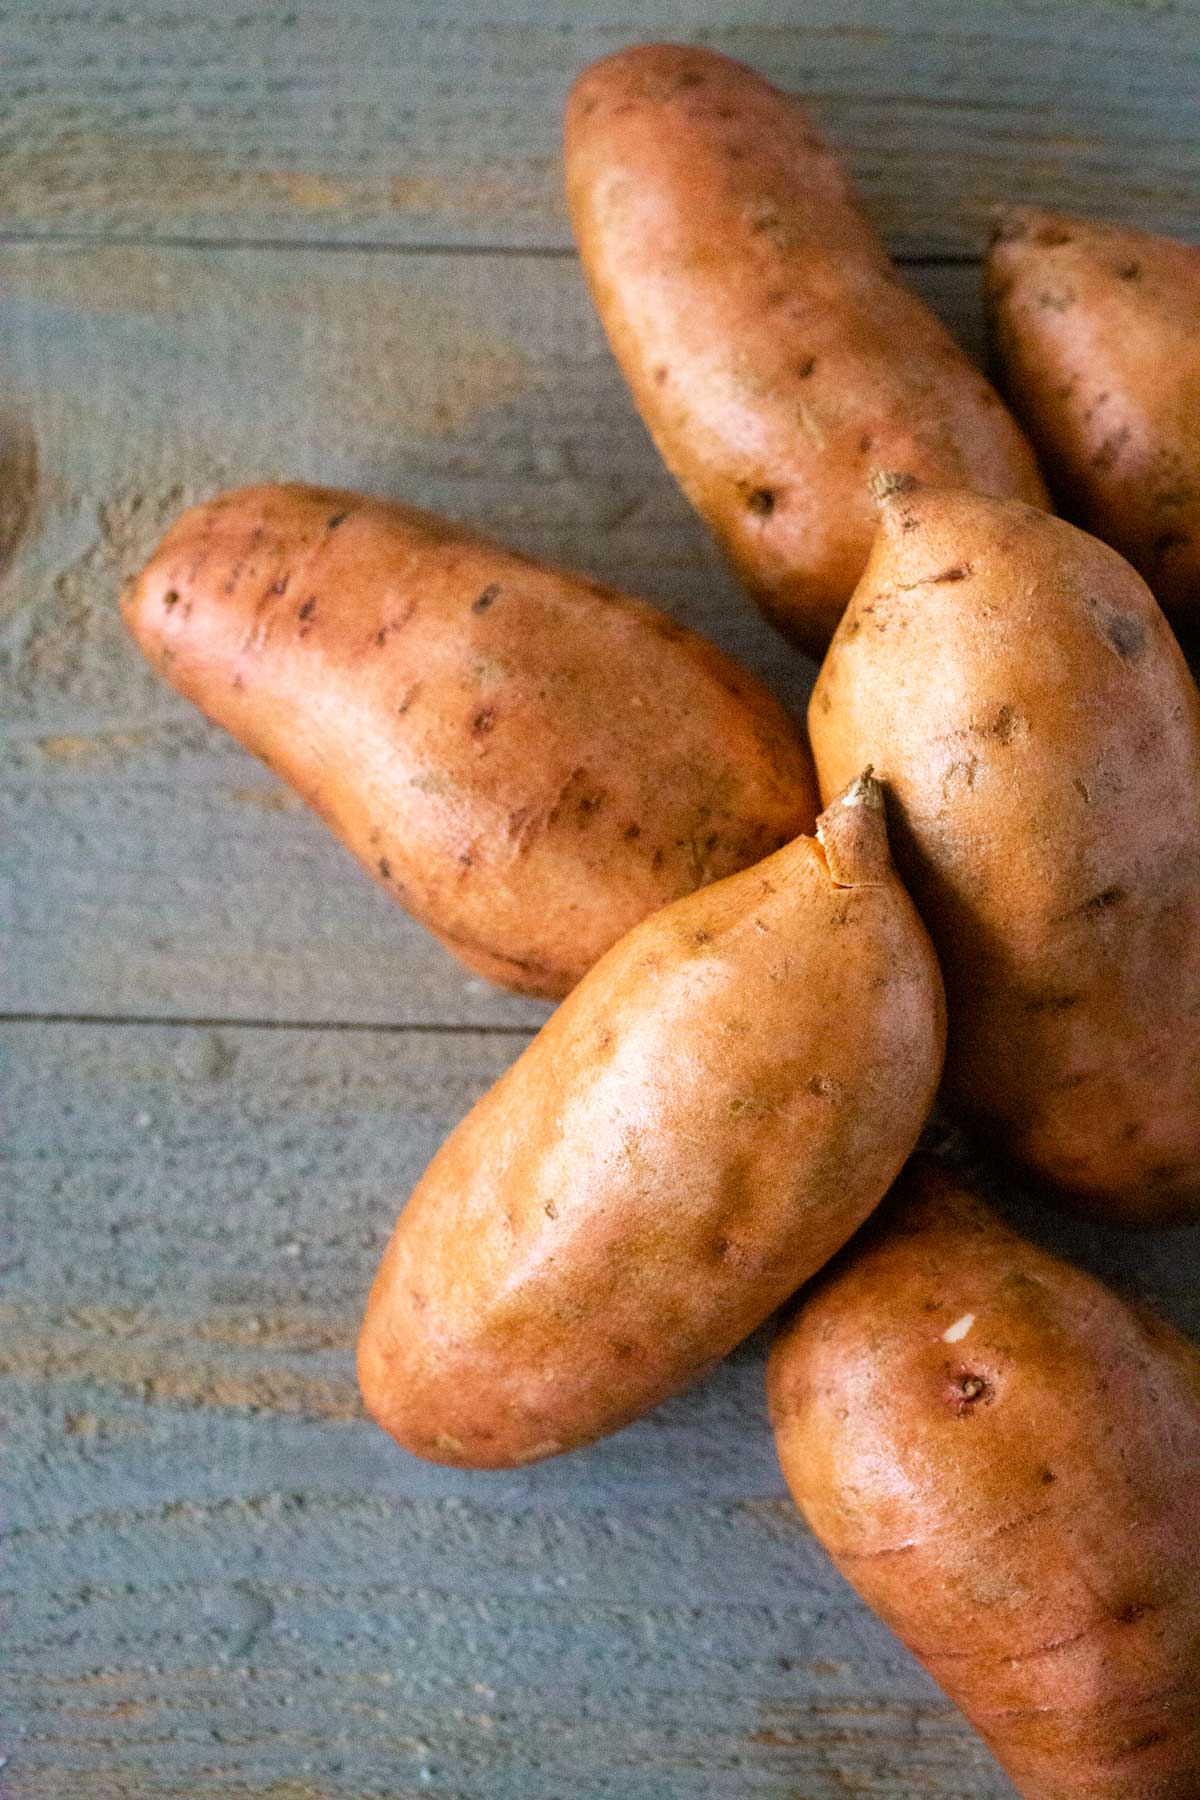 A pile of sweet potatoes ready to be baked.